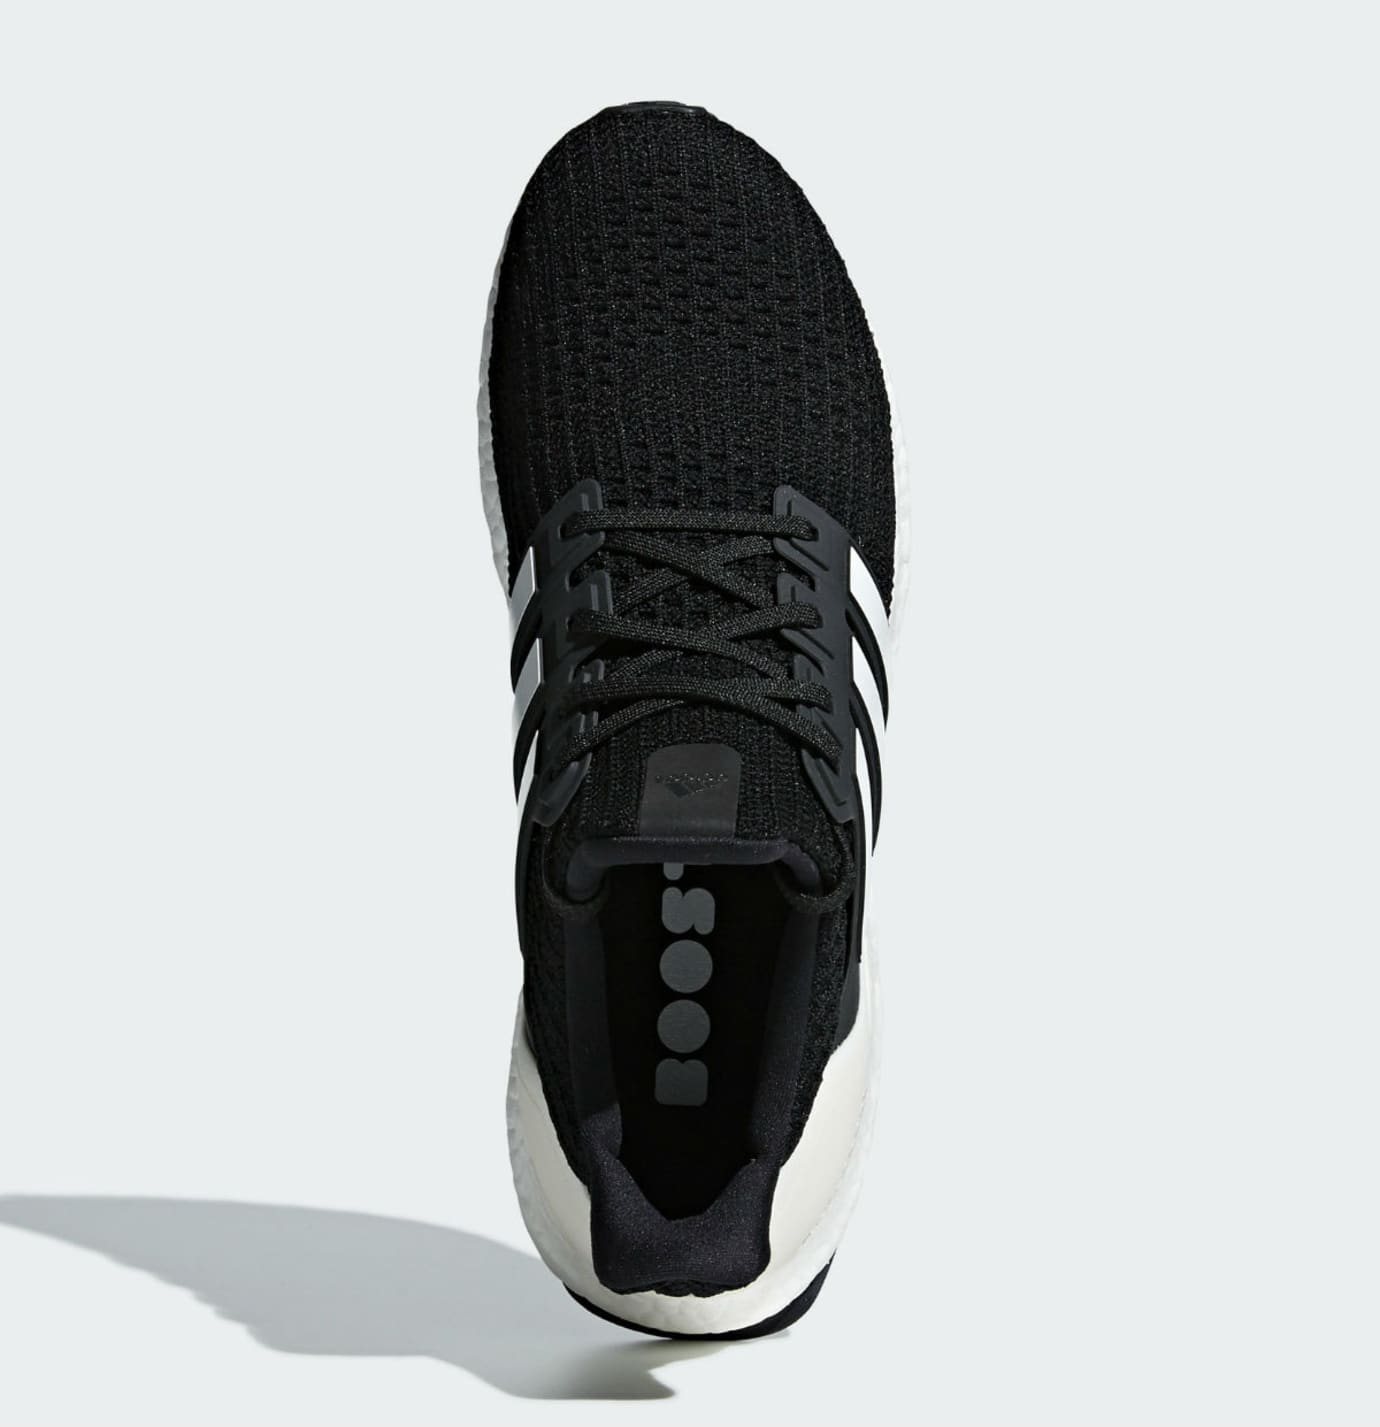 Adidas UltraBoost Solid Athletic Shoes for Men for sale eBay